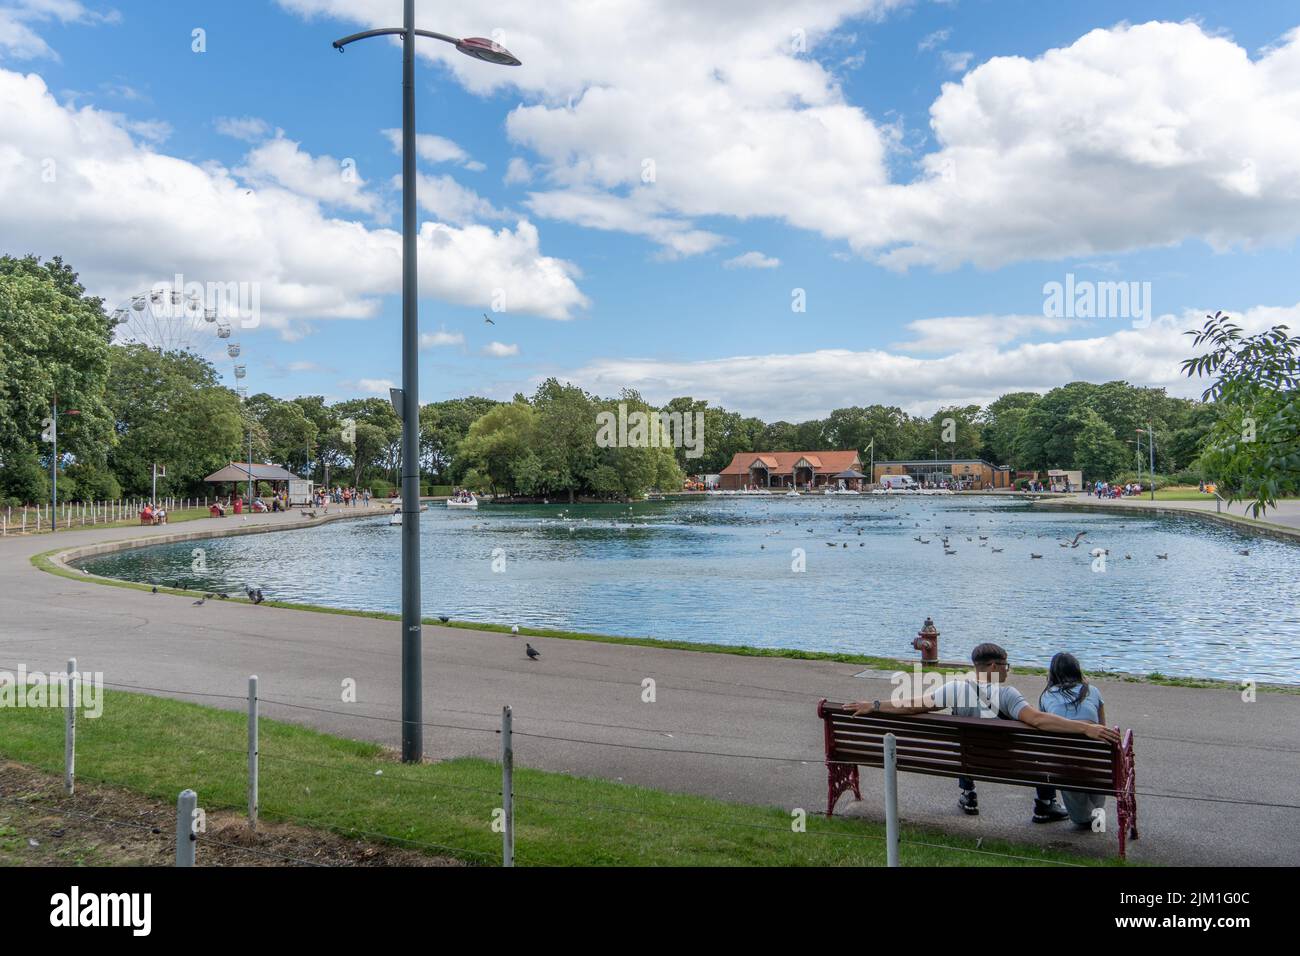 View of the lake at South Marine Park, South Shields, UK with a young couple sitting on a bench. Stock Photo